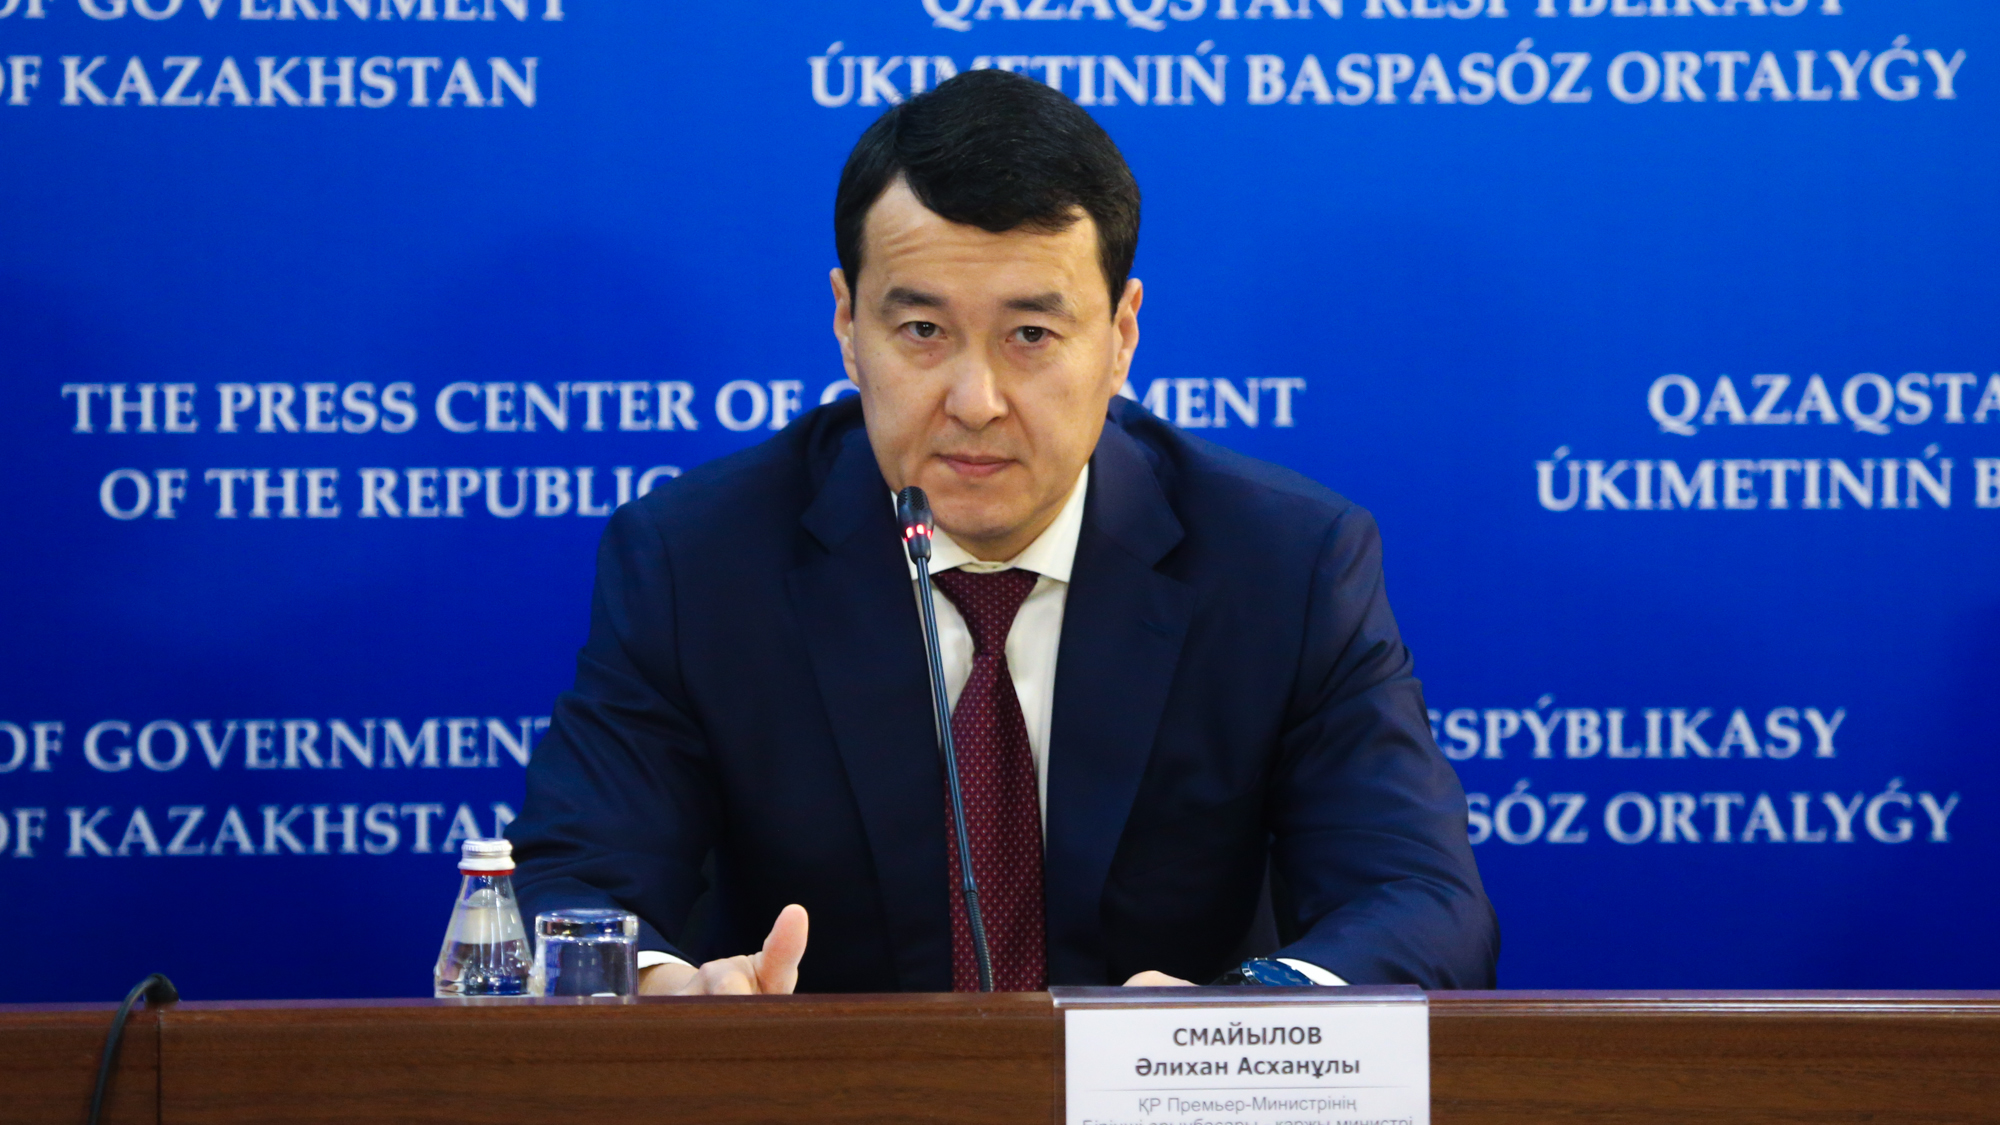 State will improve financial situation of 500 thousand Kazakhstanis